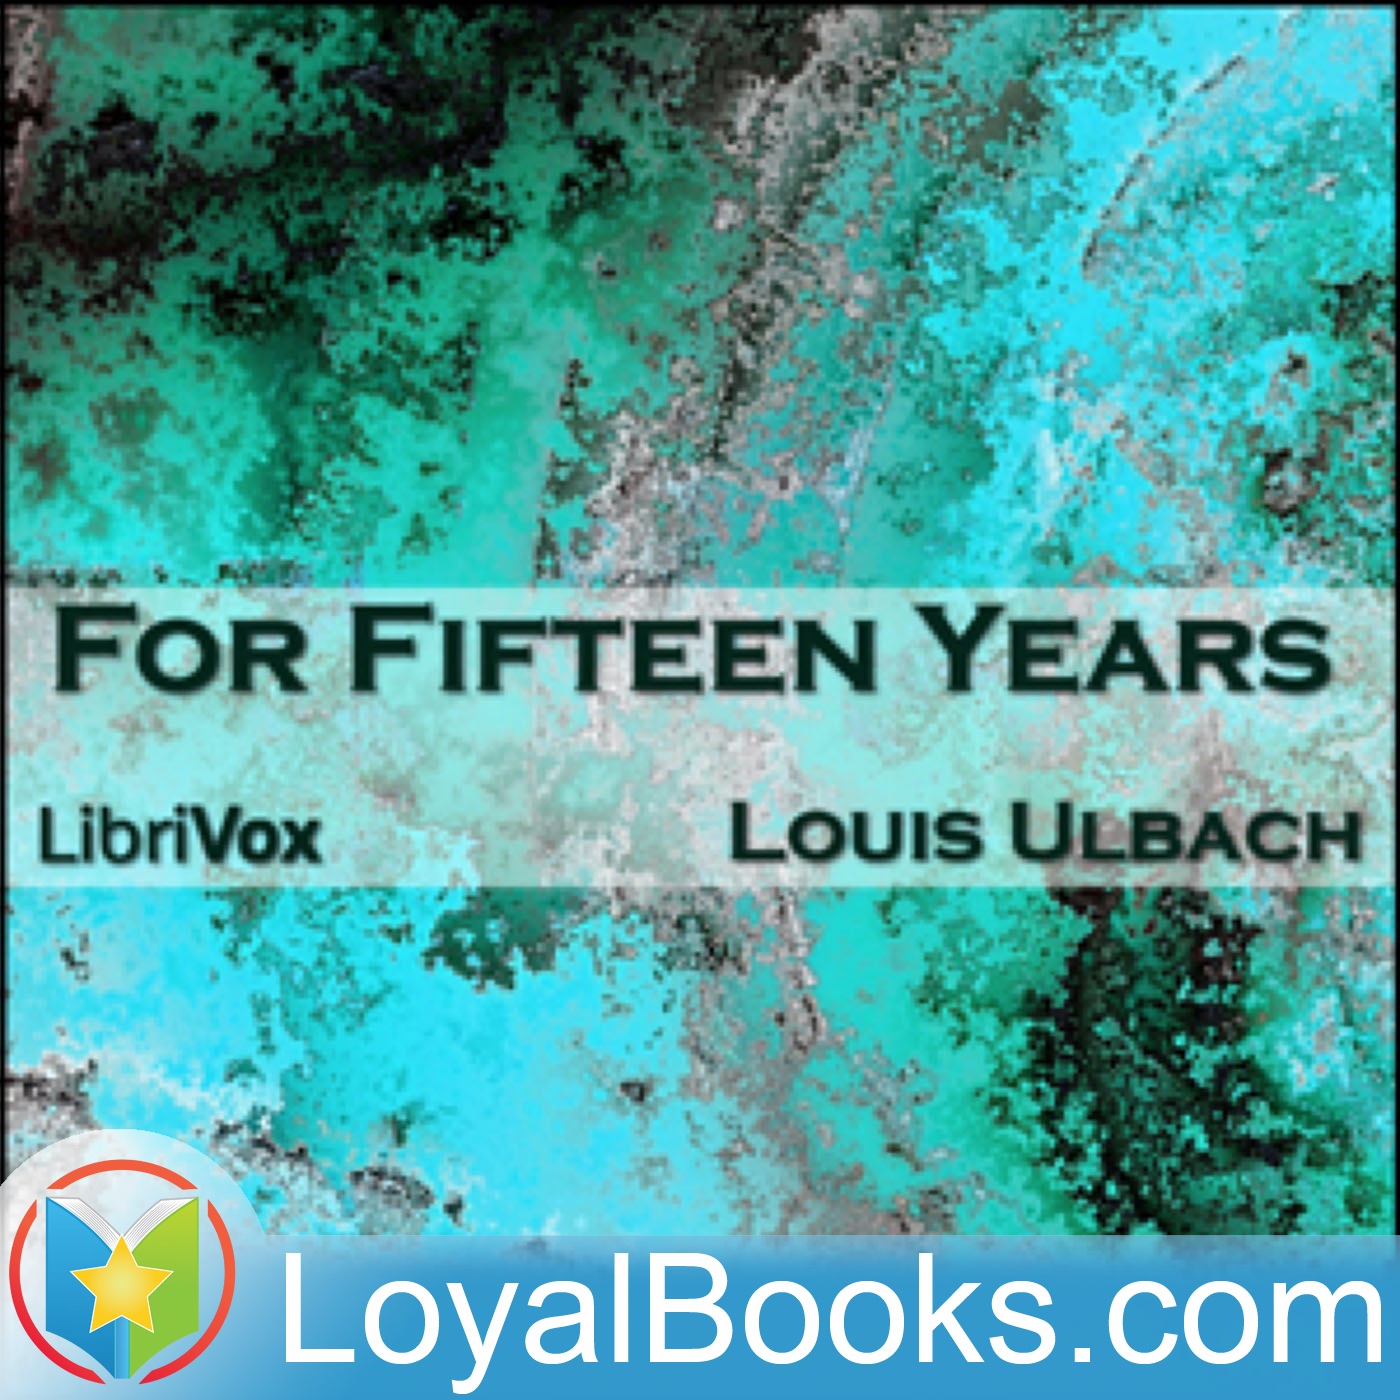 For Fifteen Years by Louis Ulbach